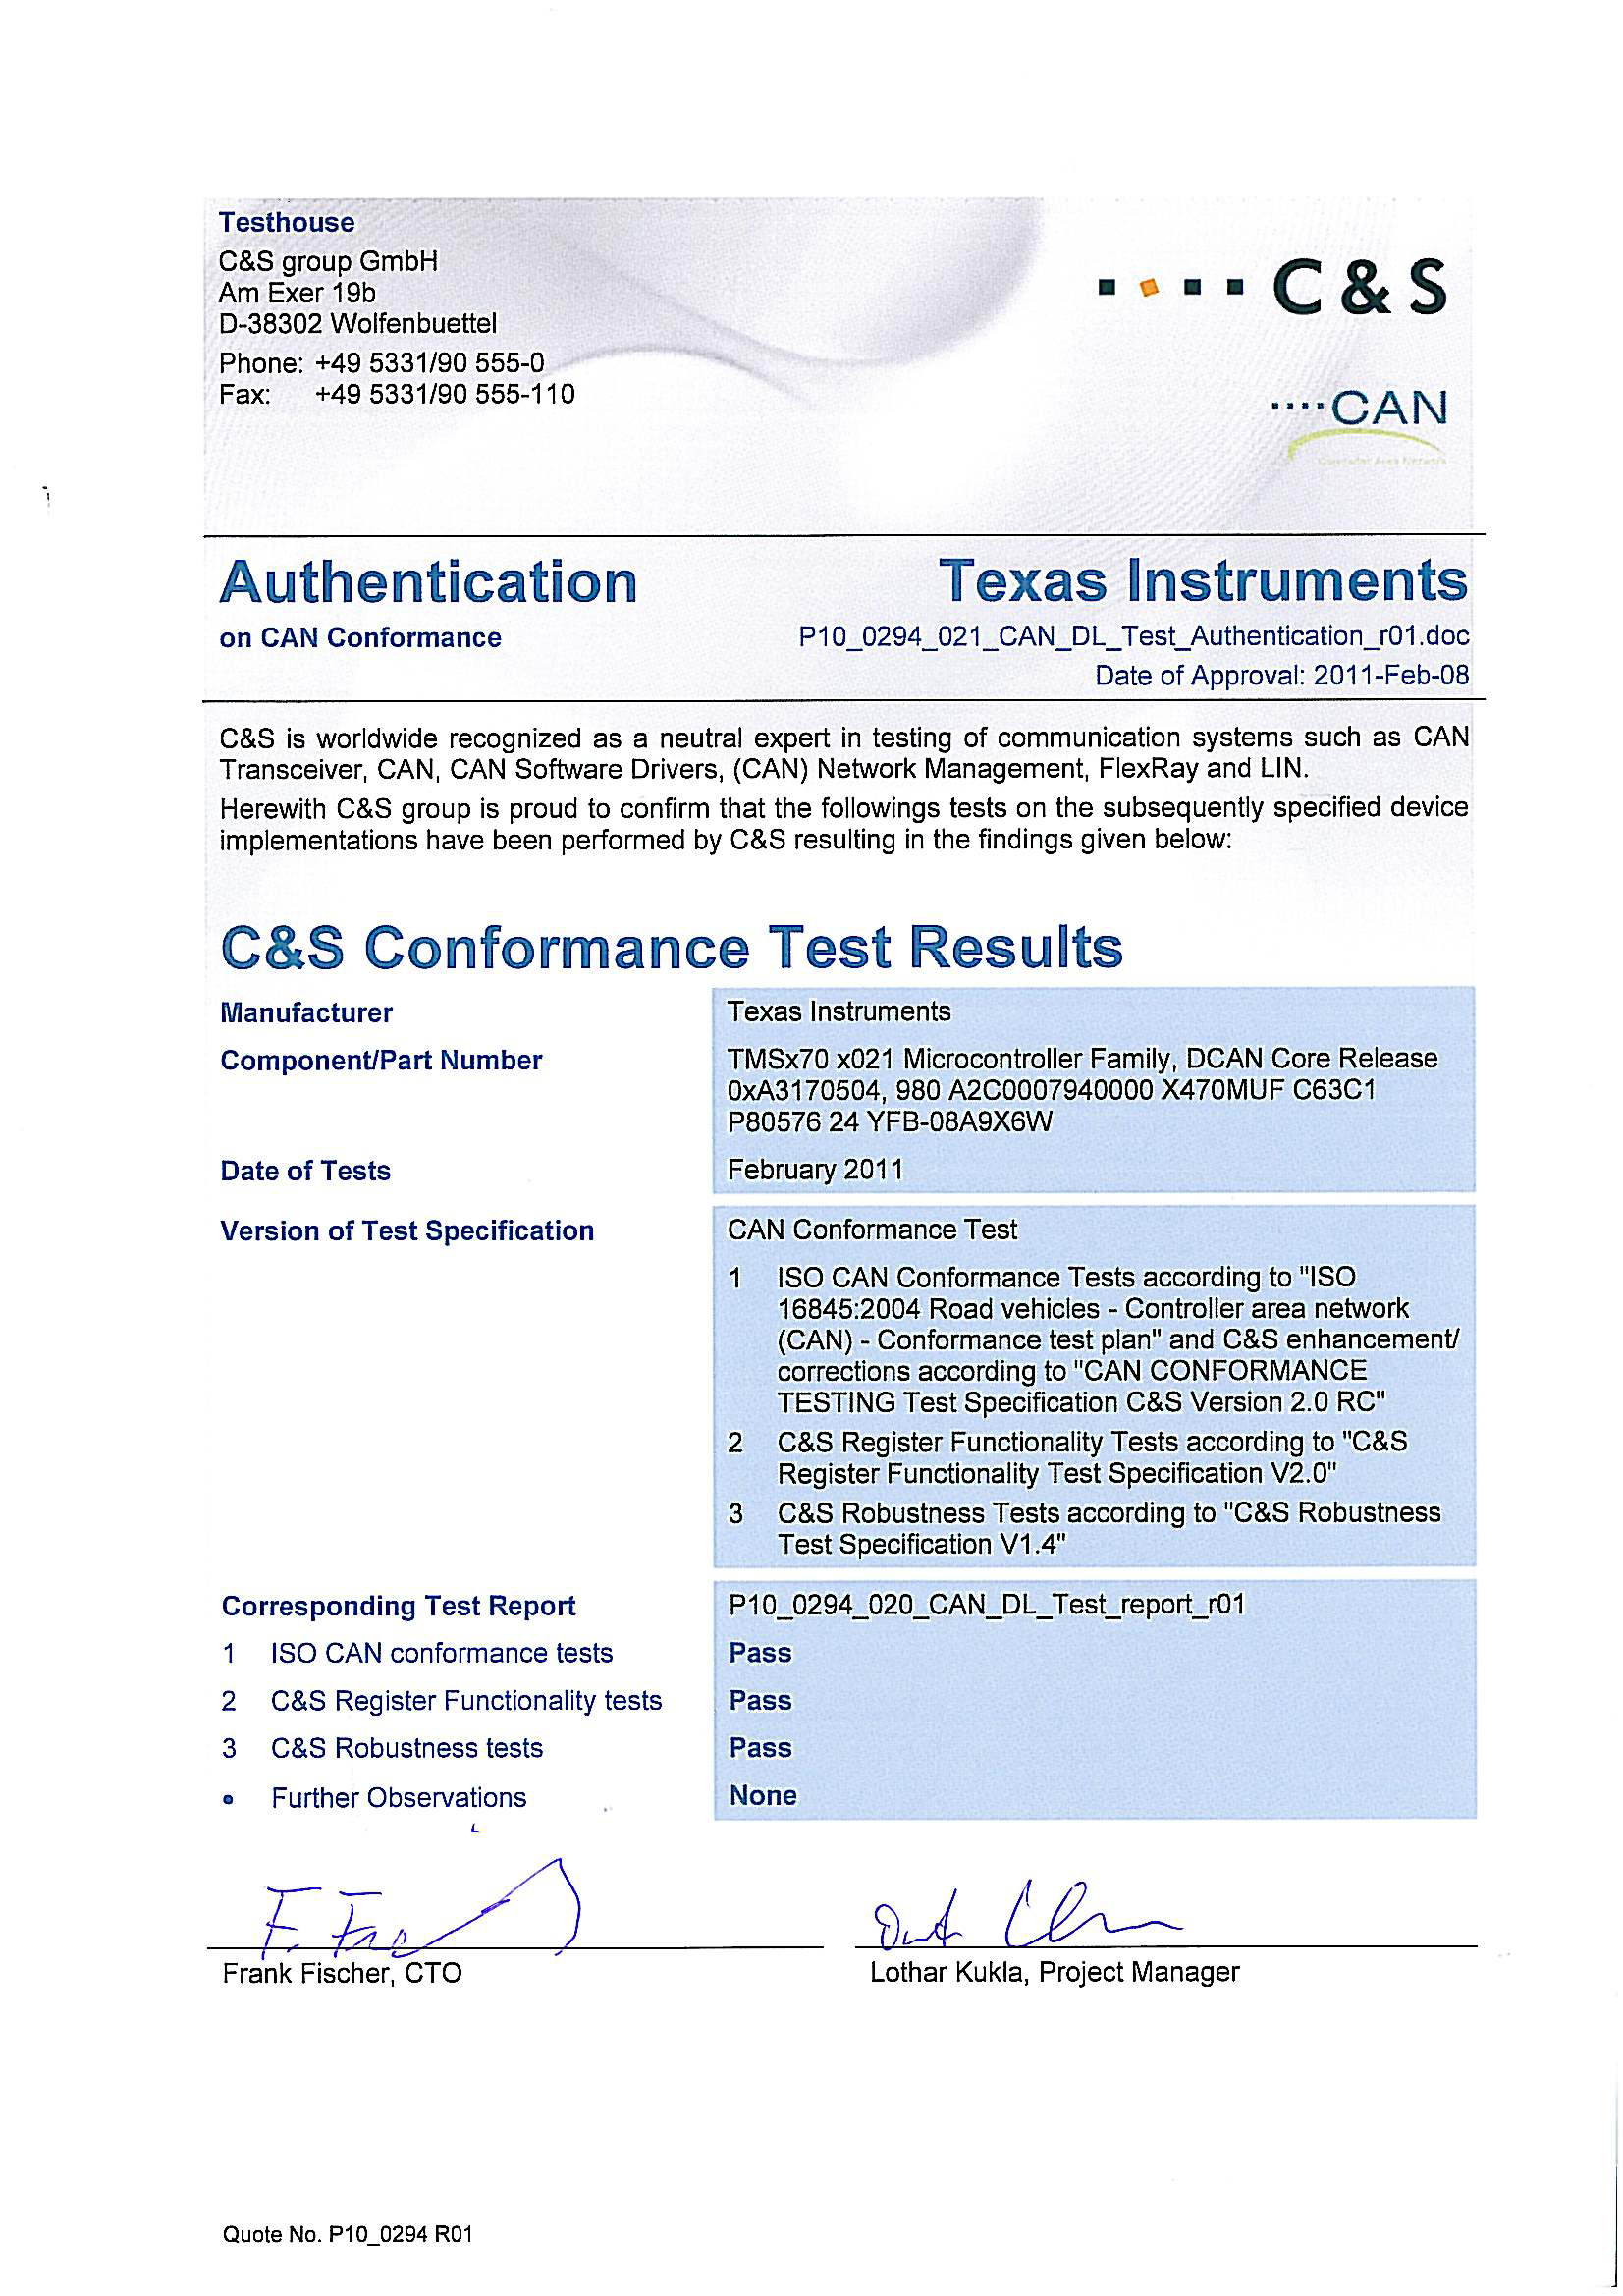 CAN_Certification_2011_02_08.png